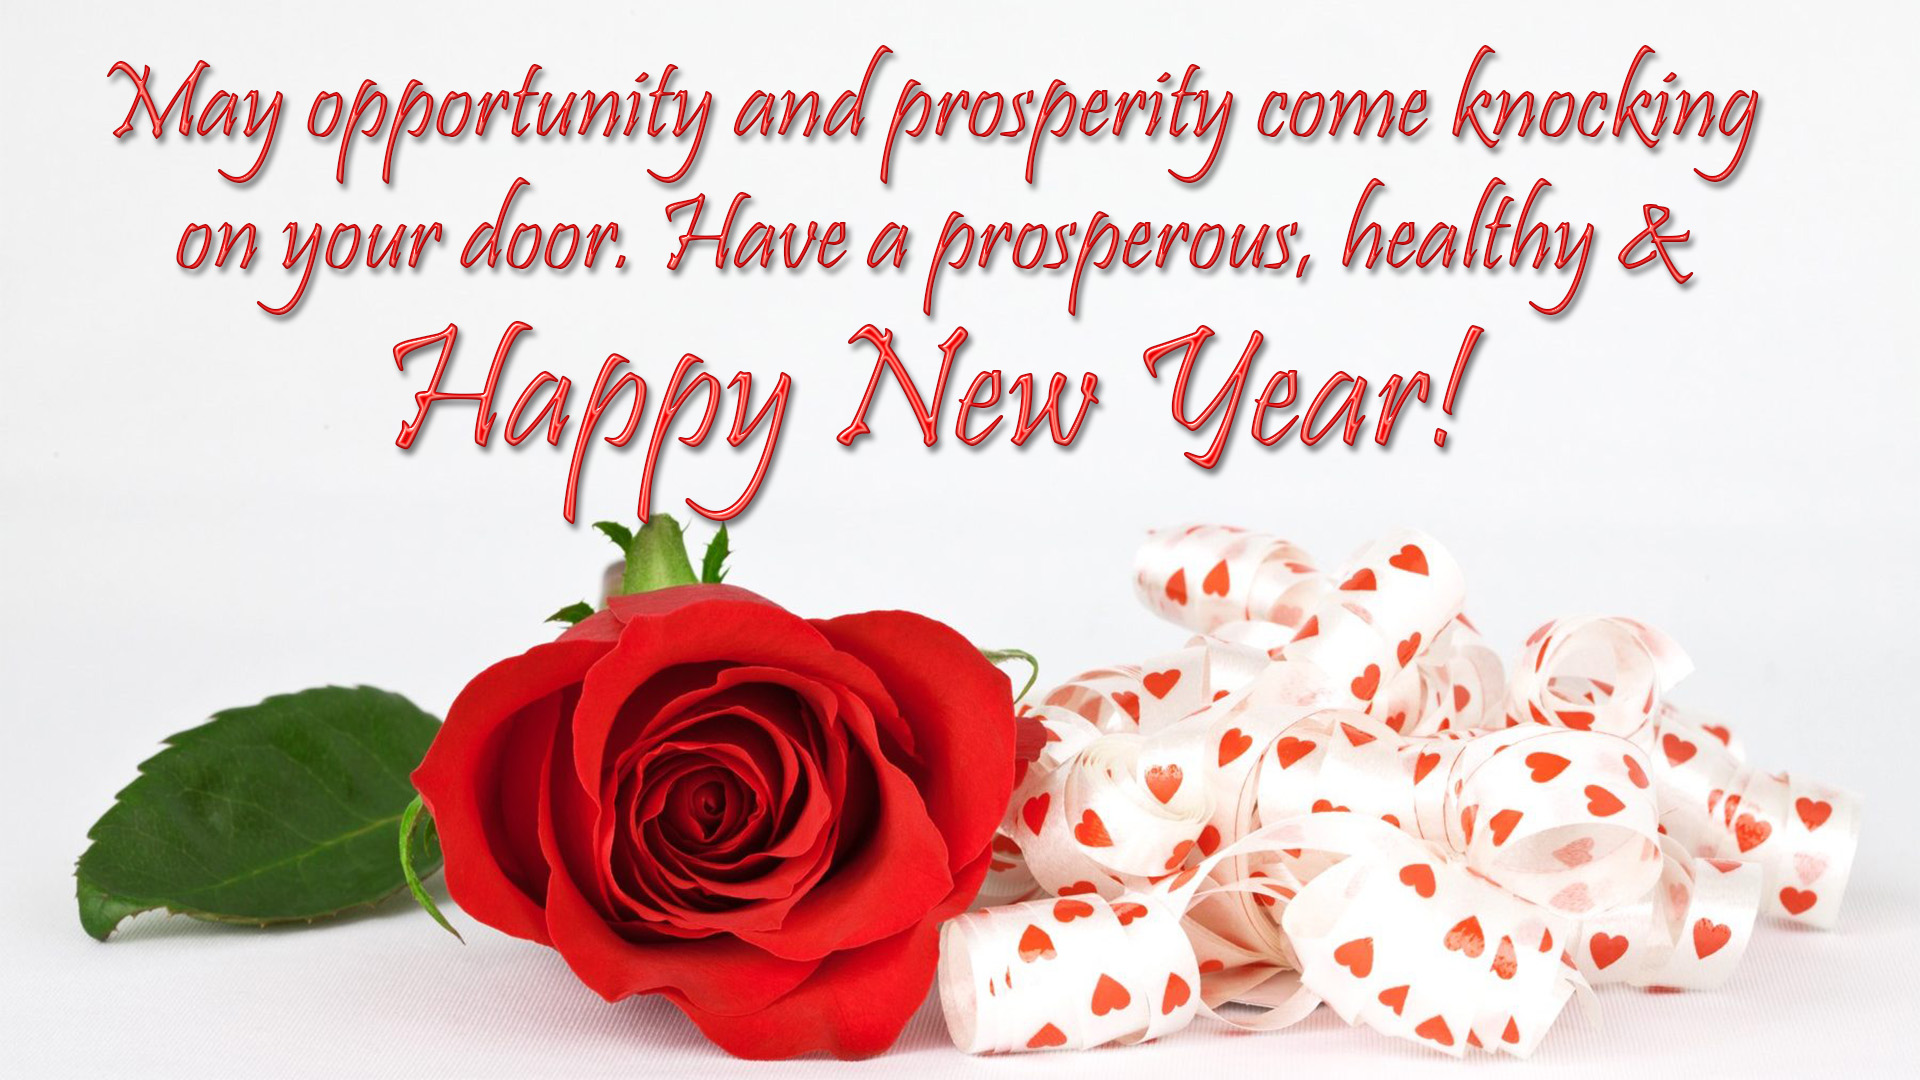 happy new year wishes image